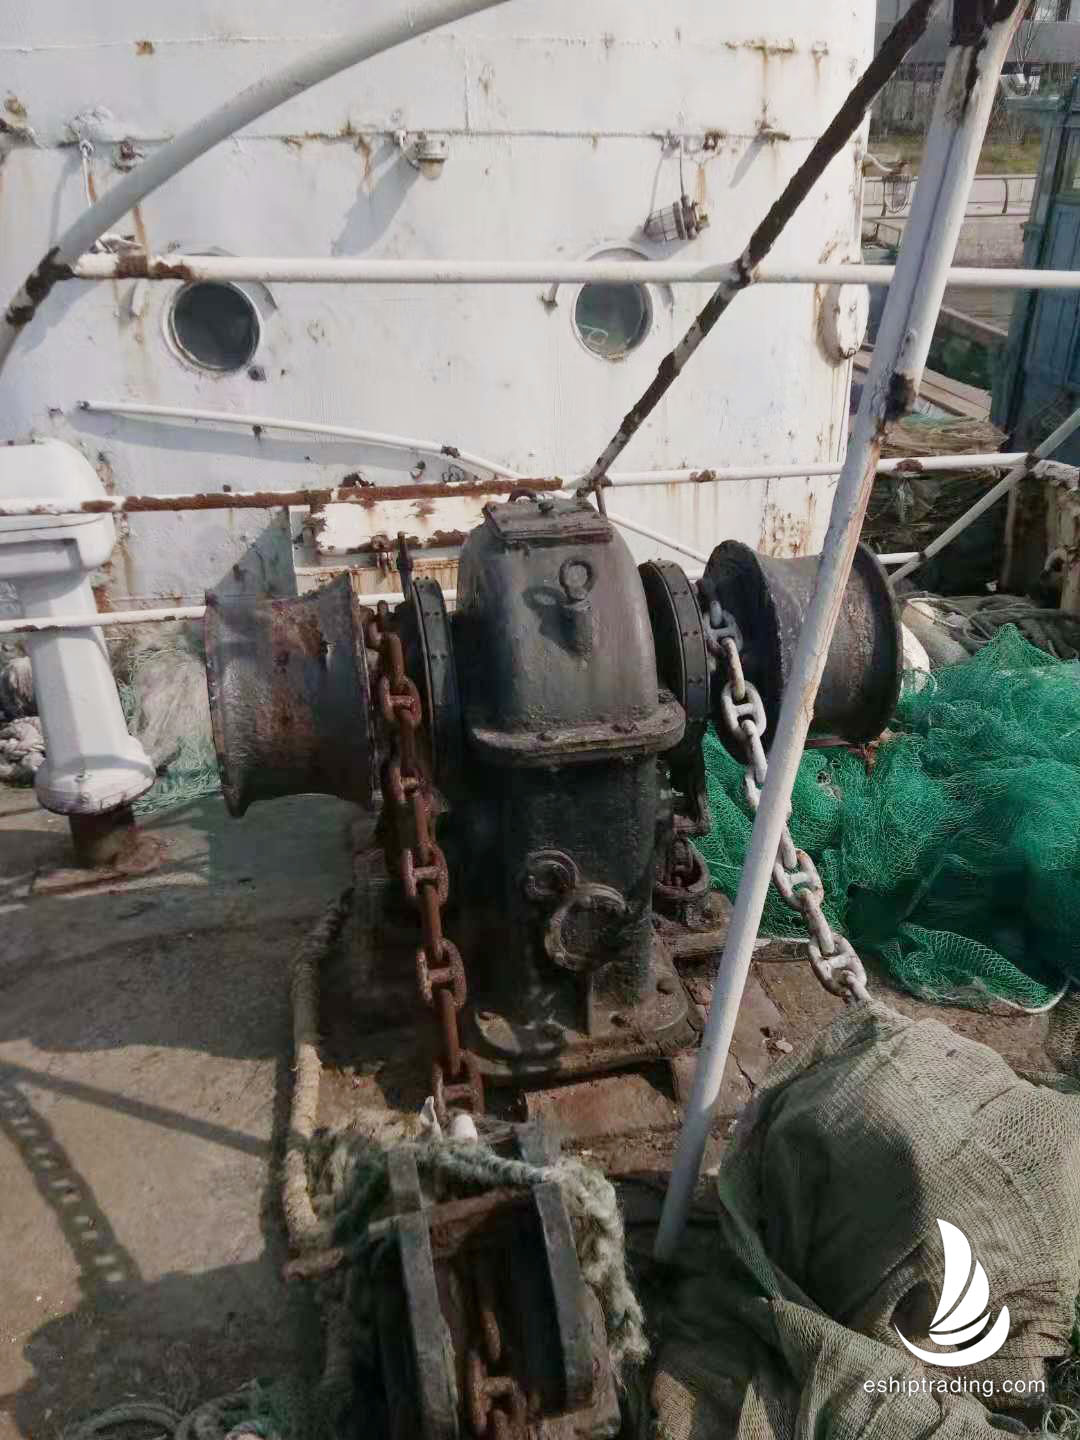 1670 PS Towing Tug For Sale